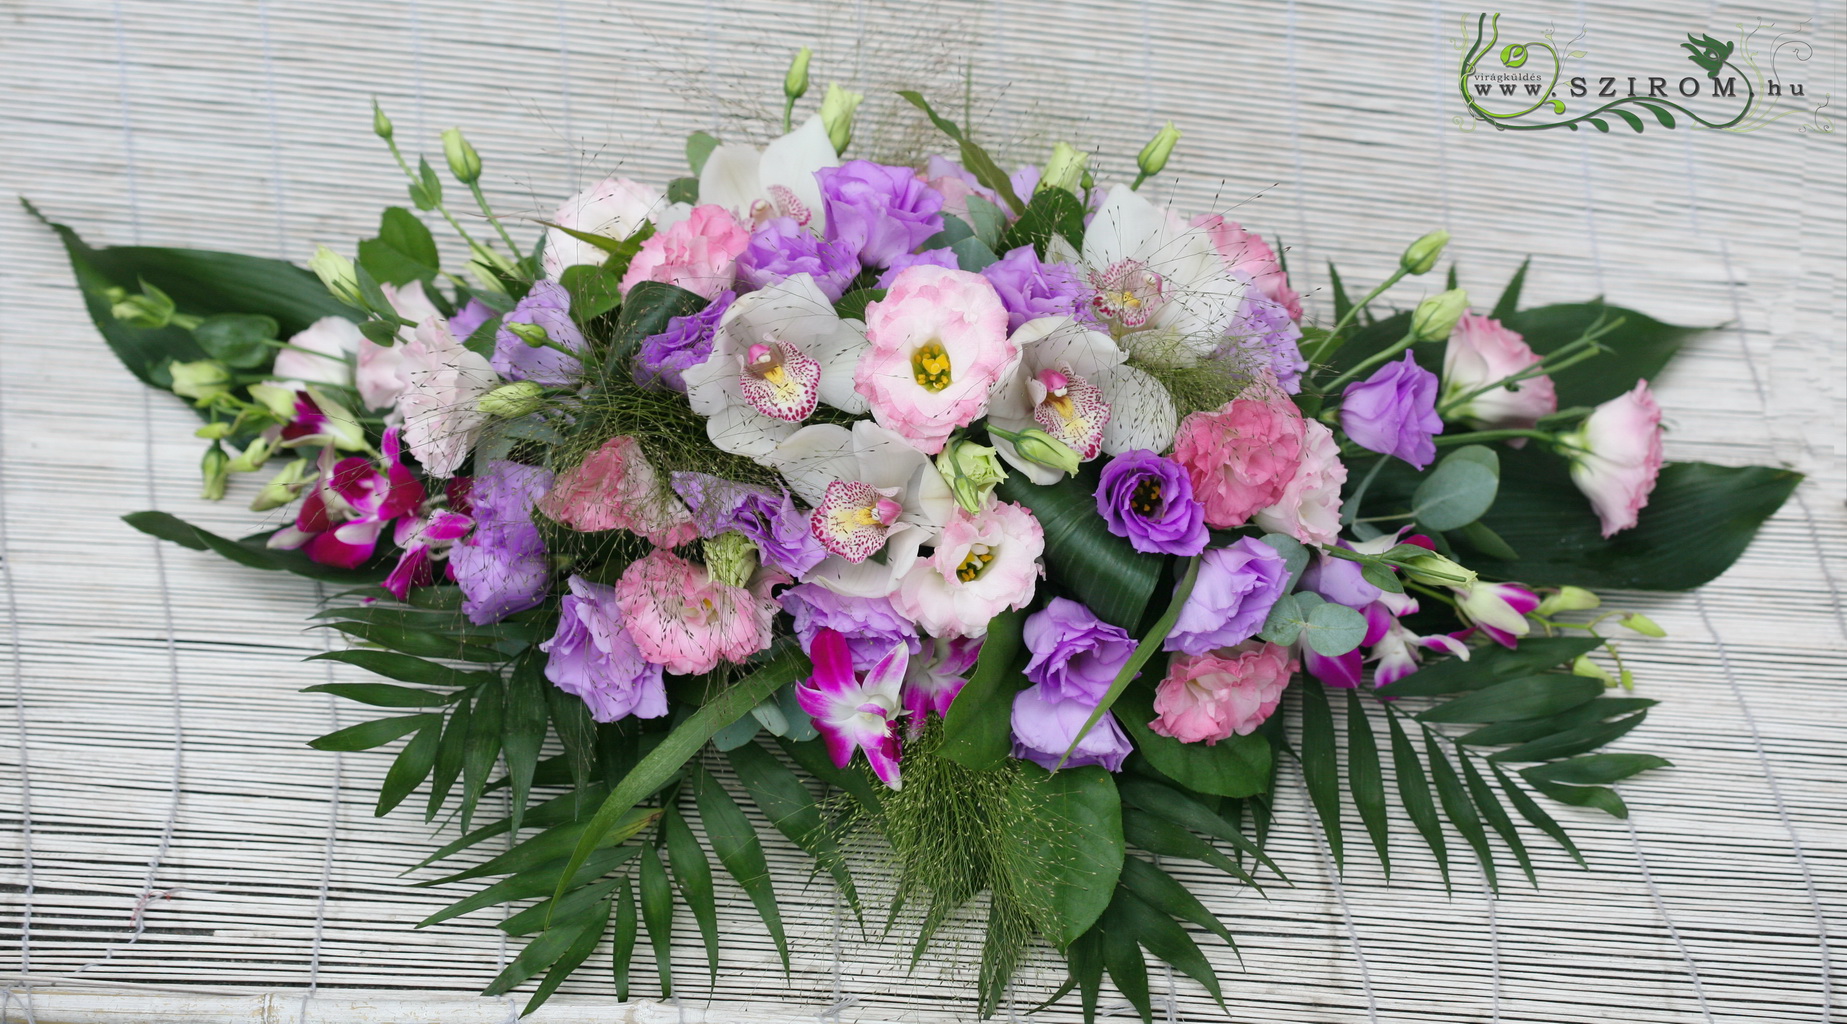 flower delivery Budapest - Corner car flower arrangement with lisianthus and orchids (purple, pink, white)